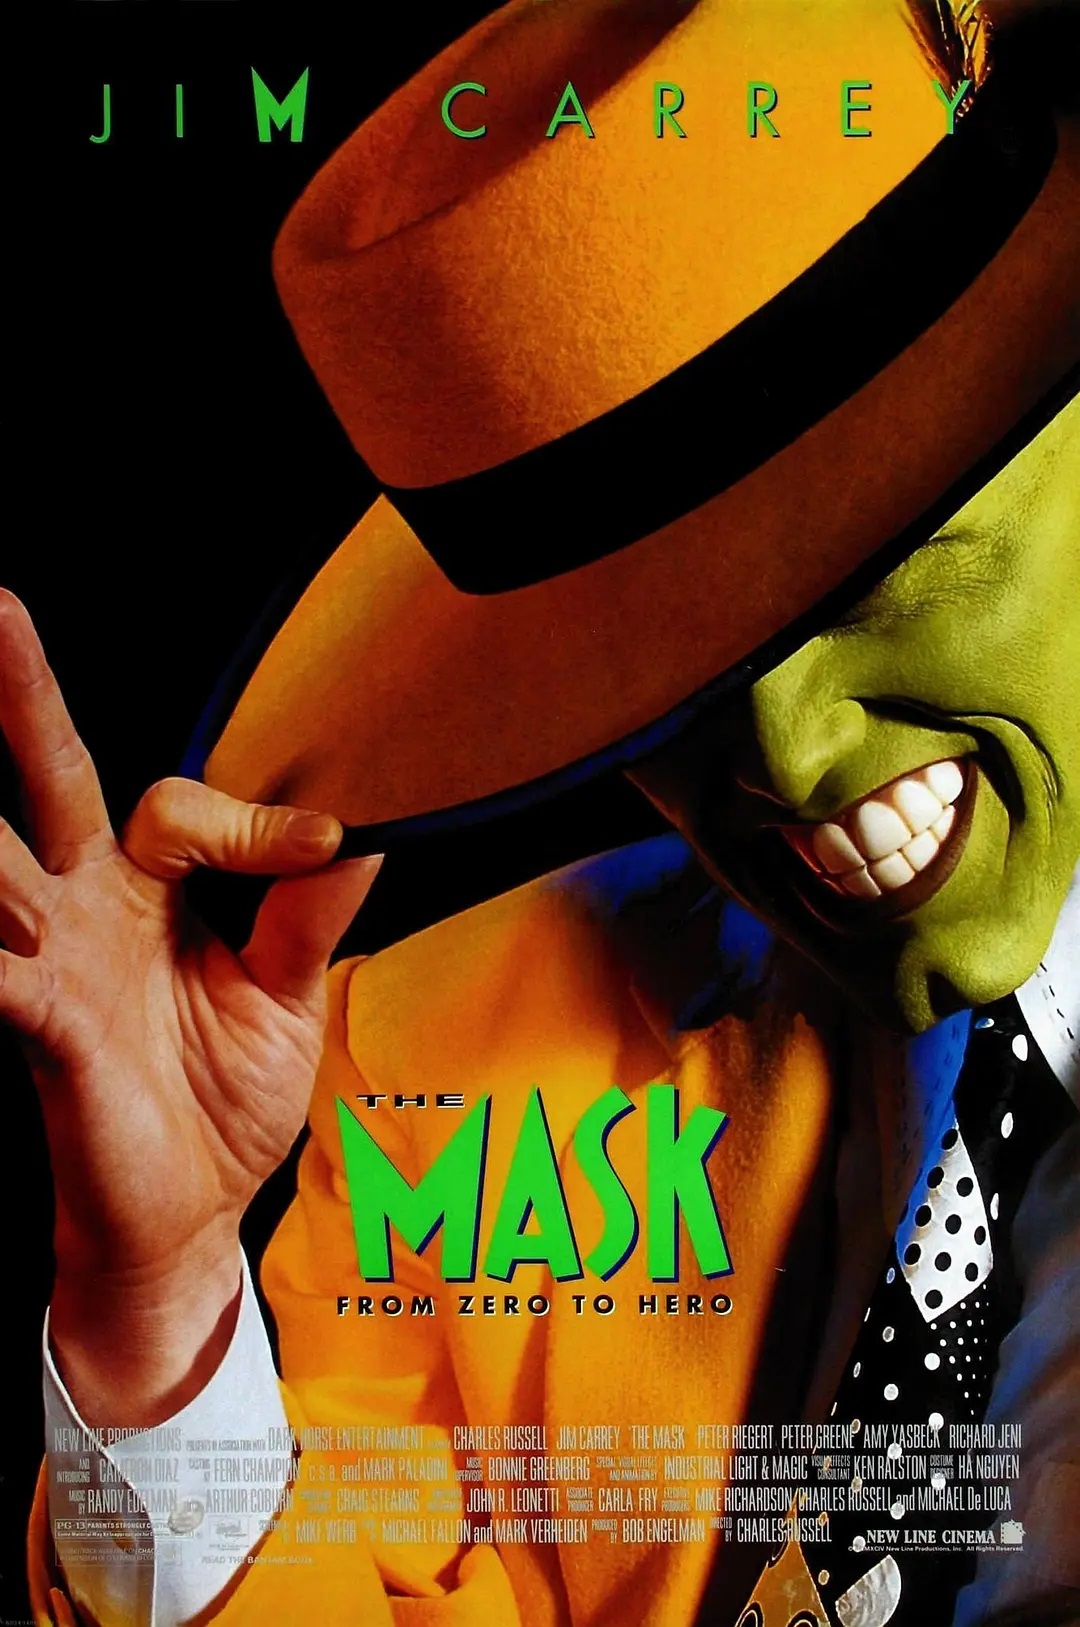  free-movies-on-youtube-The-Mask  